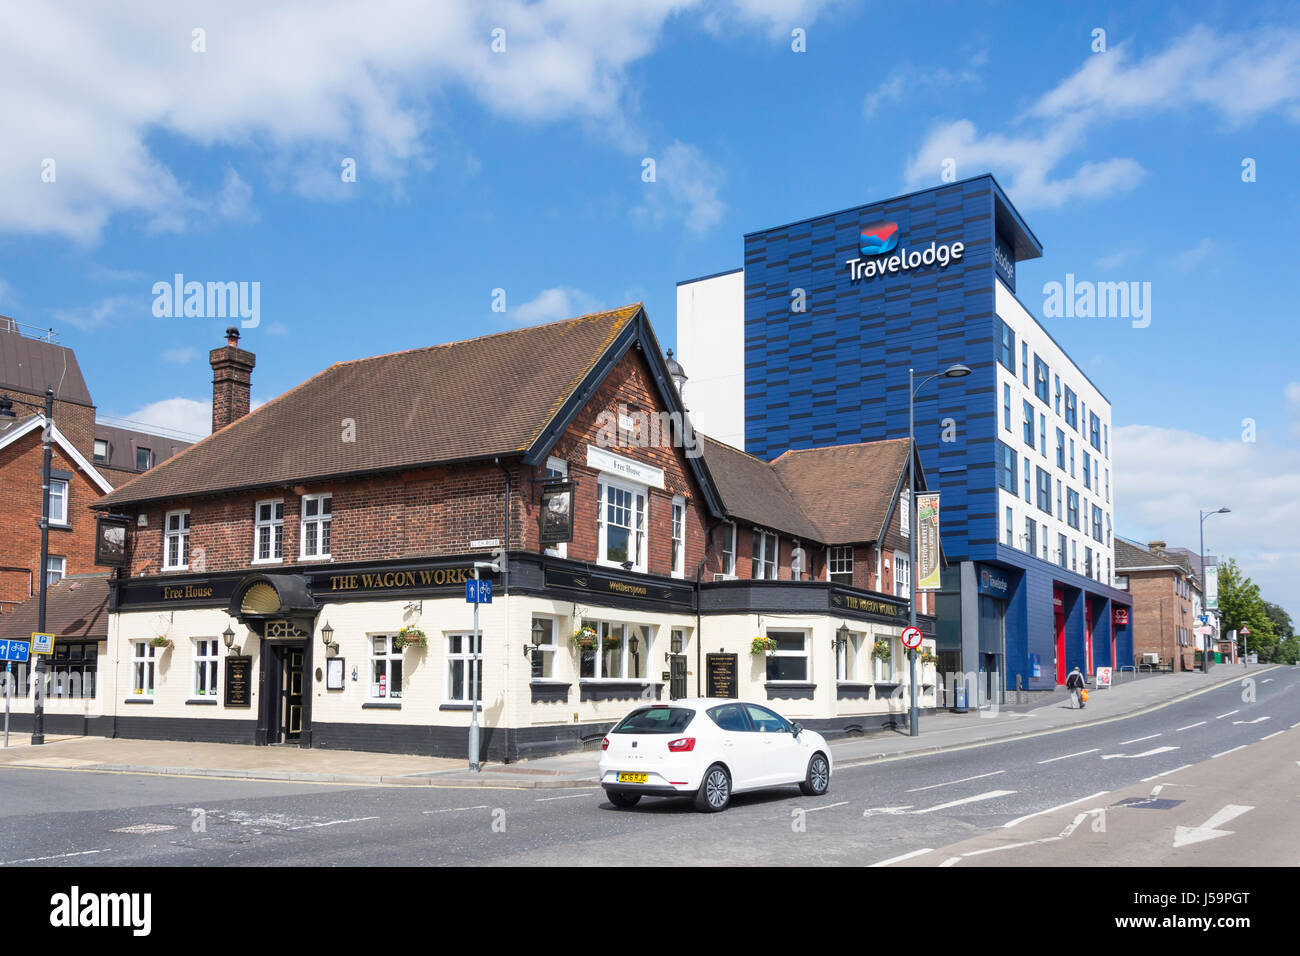 Le Wagon Works Pub et Travelodge Central Hotel, Southampton Road, Eastleigh, Hampshire, Angleterre, Royaume-Uni Banque D'Images